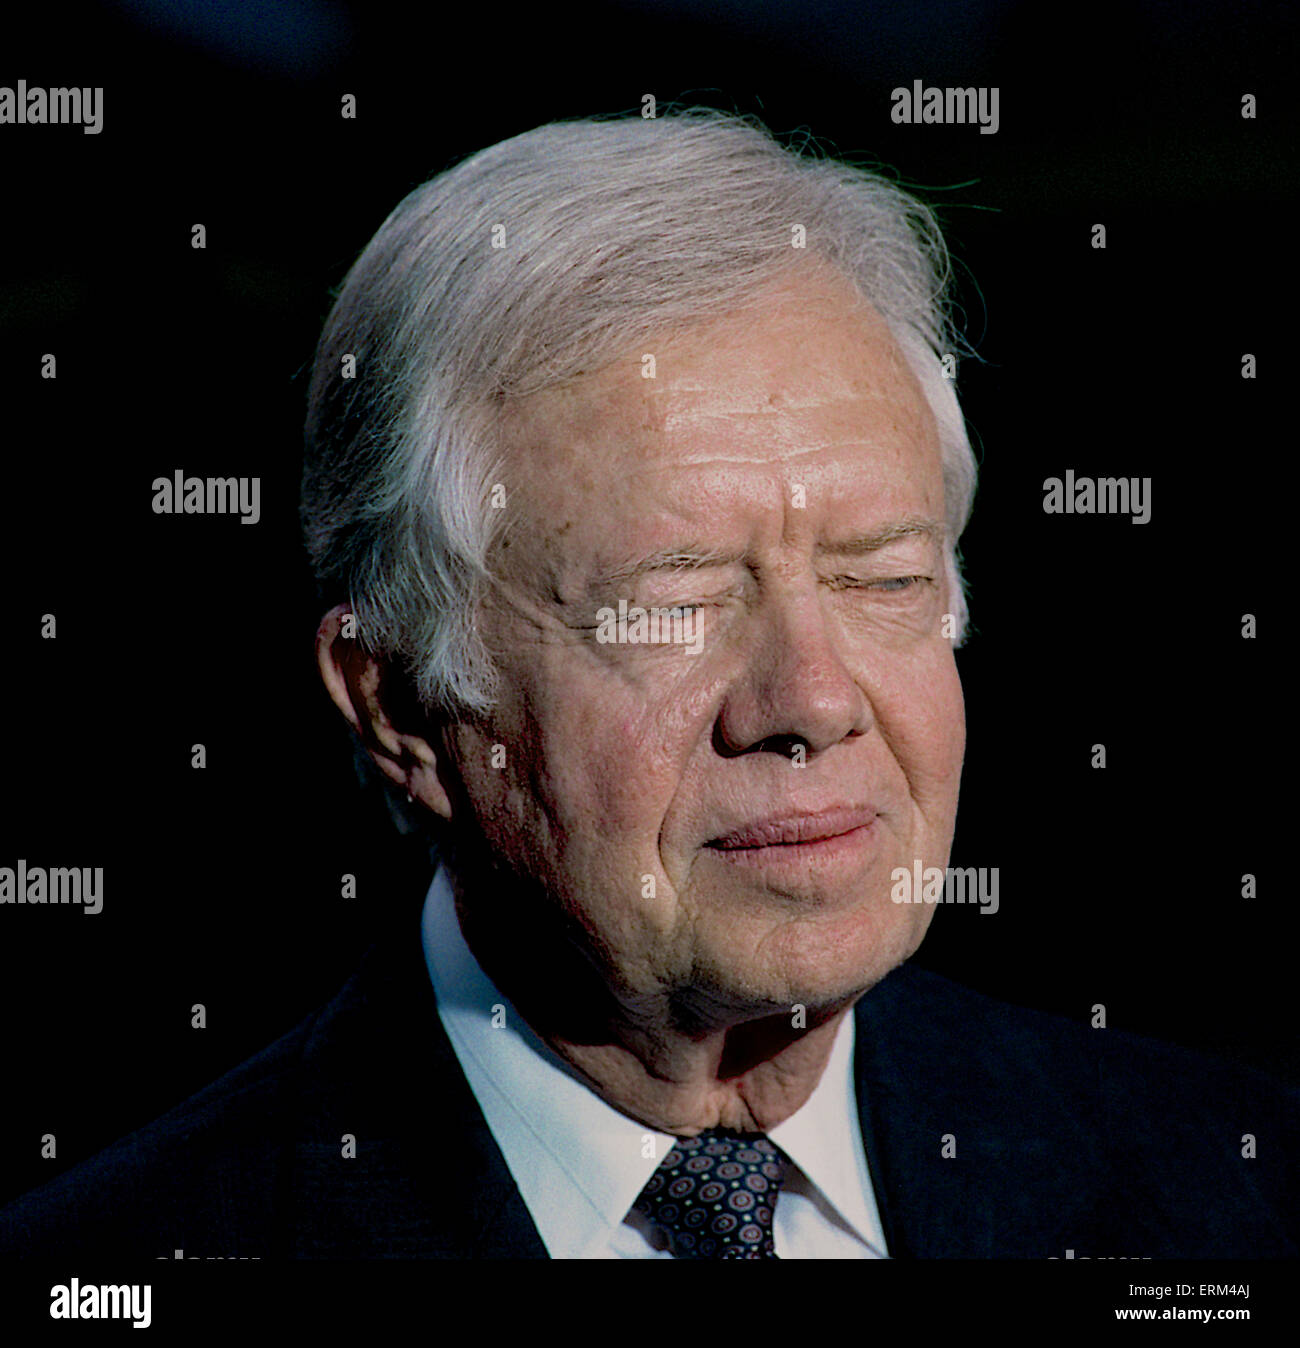 Washington. DC. 9-13-1993 Former President James (Jimmy) Carter sits for a TV interview on the North Lawn of the White House prior to attending the annual Presidents dinner being hosted by current President William Clinton  Credit: Mark Reinstein Stock Photo